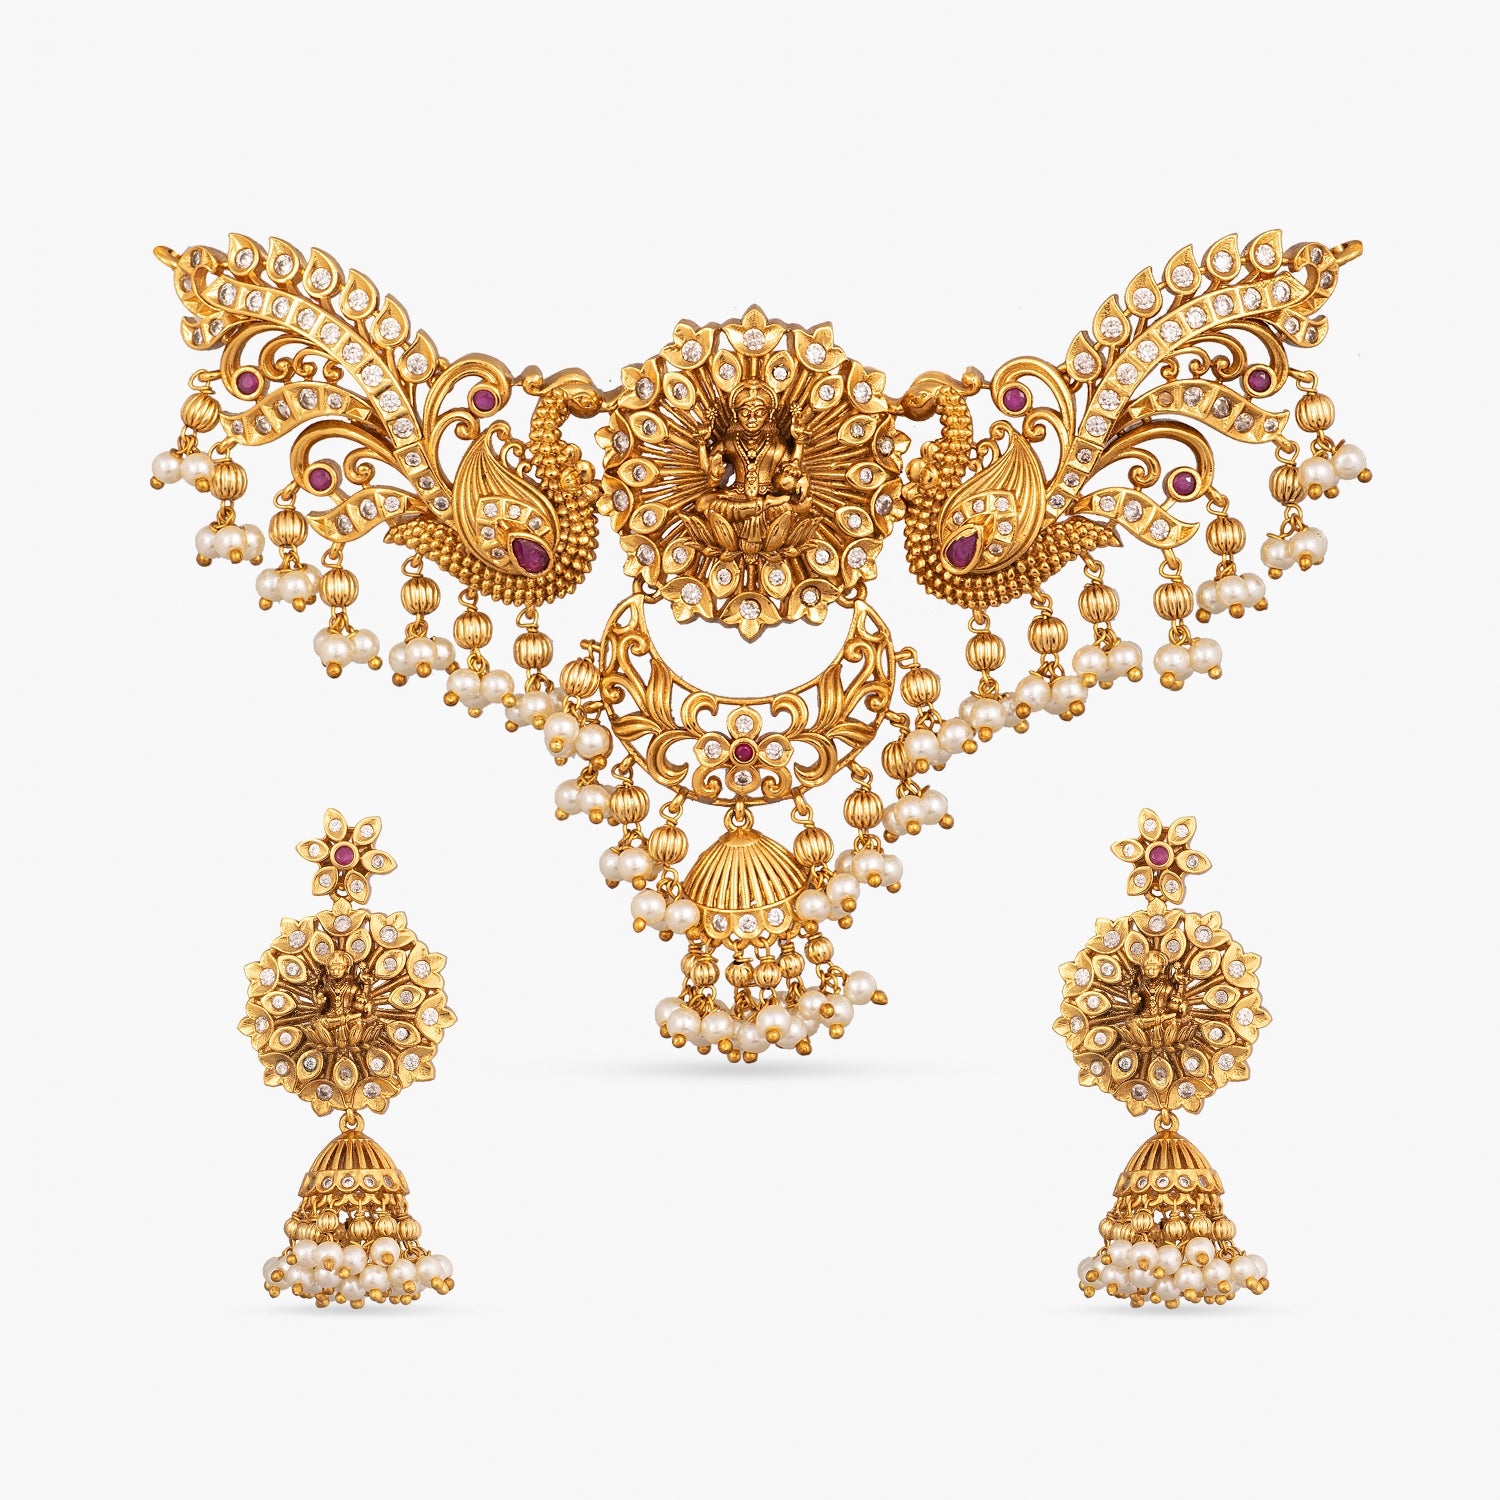 An image of an Indian artificial necklace with divine and peacock motifs and pearls on a white background.